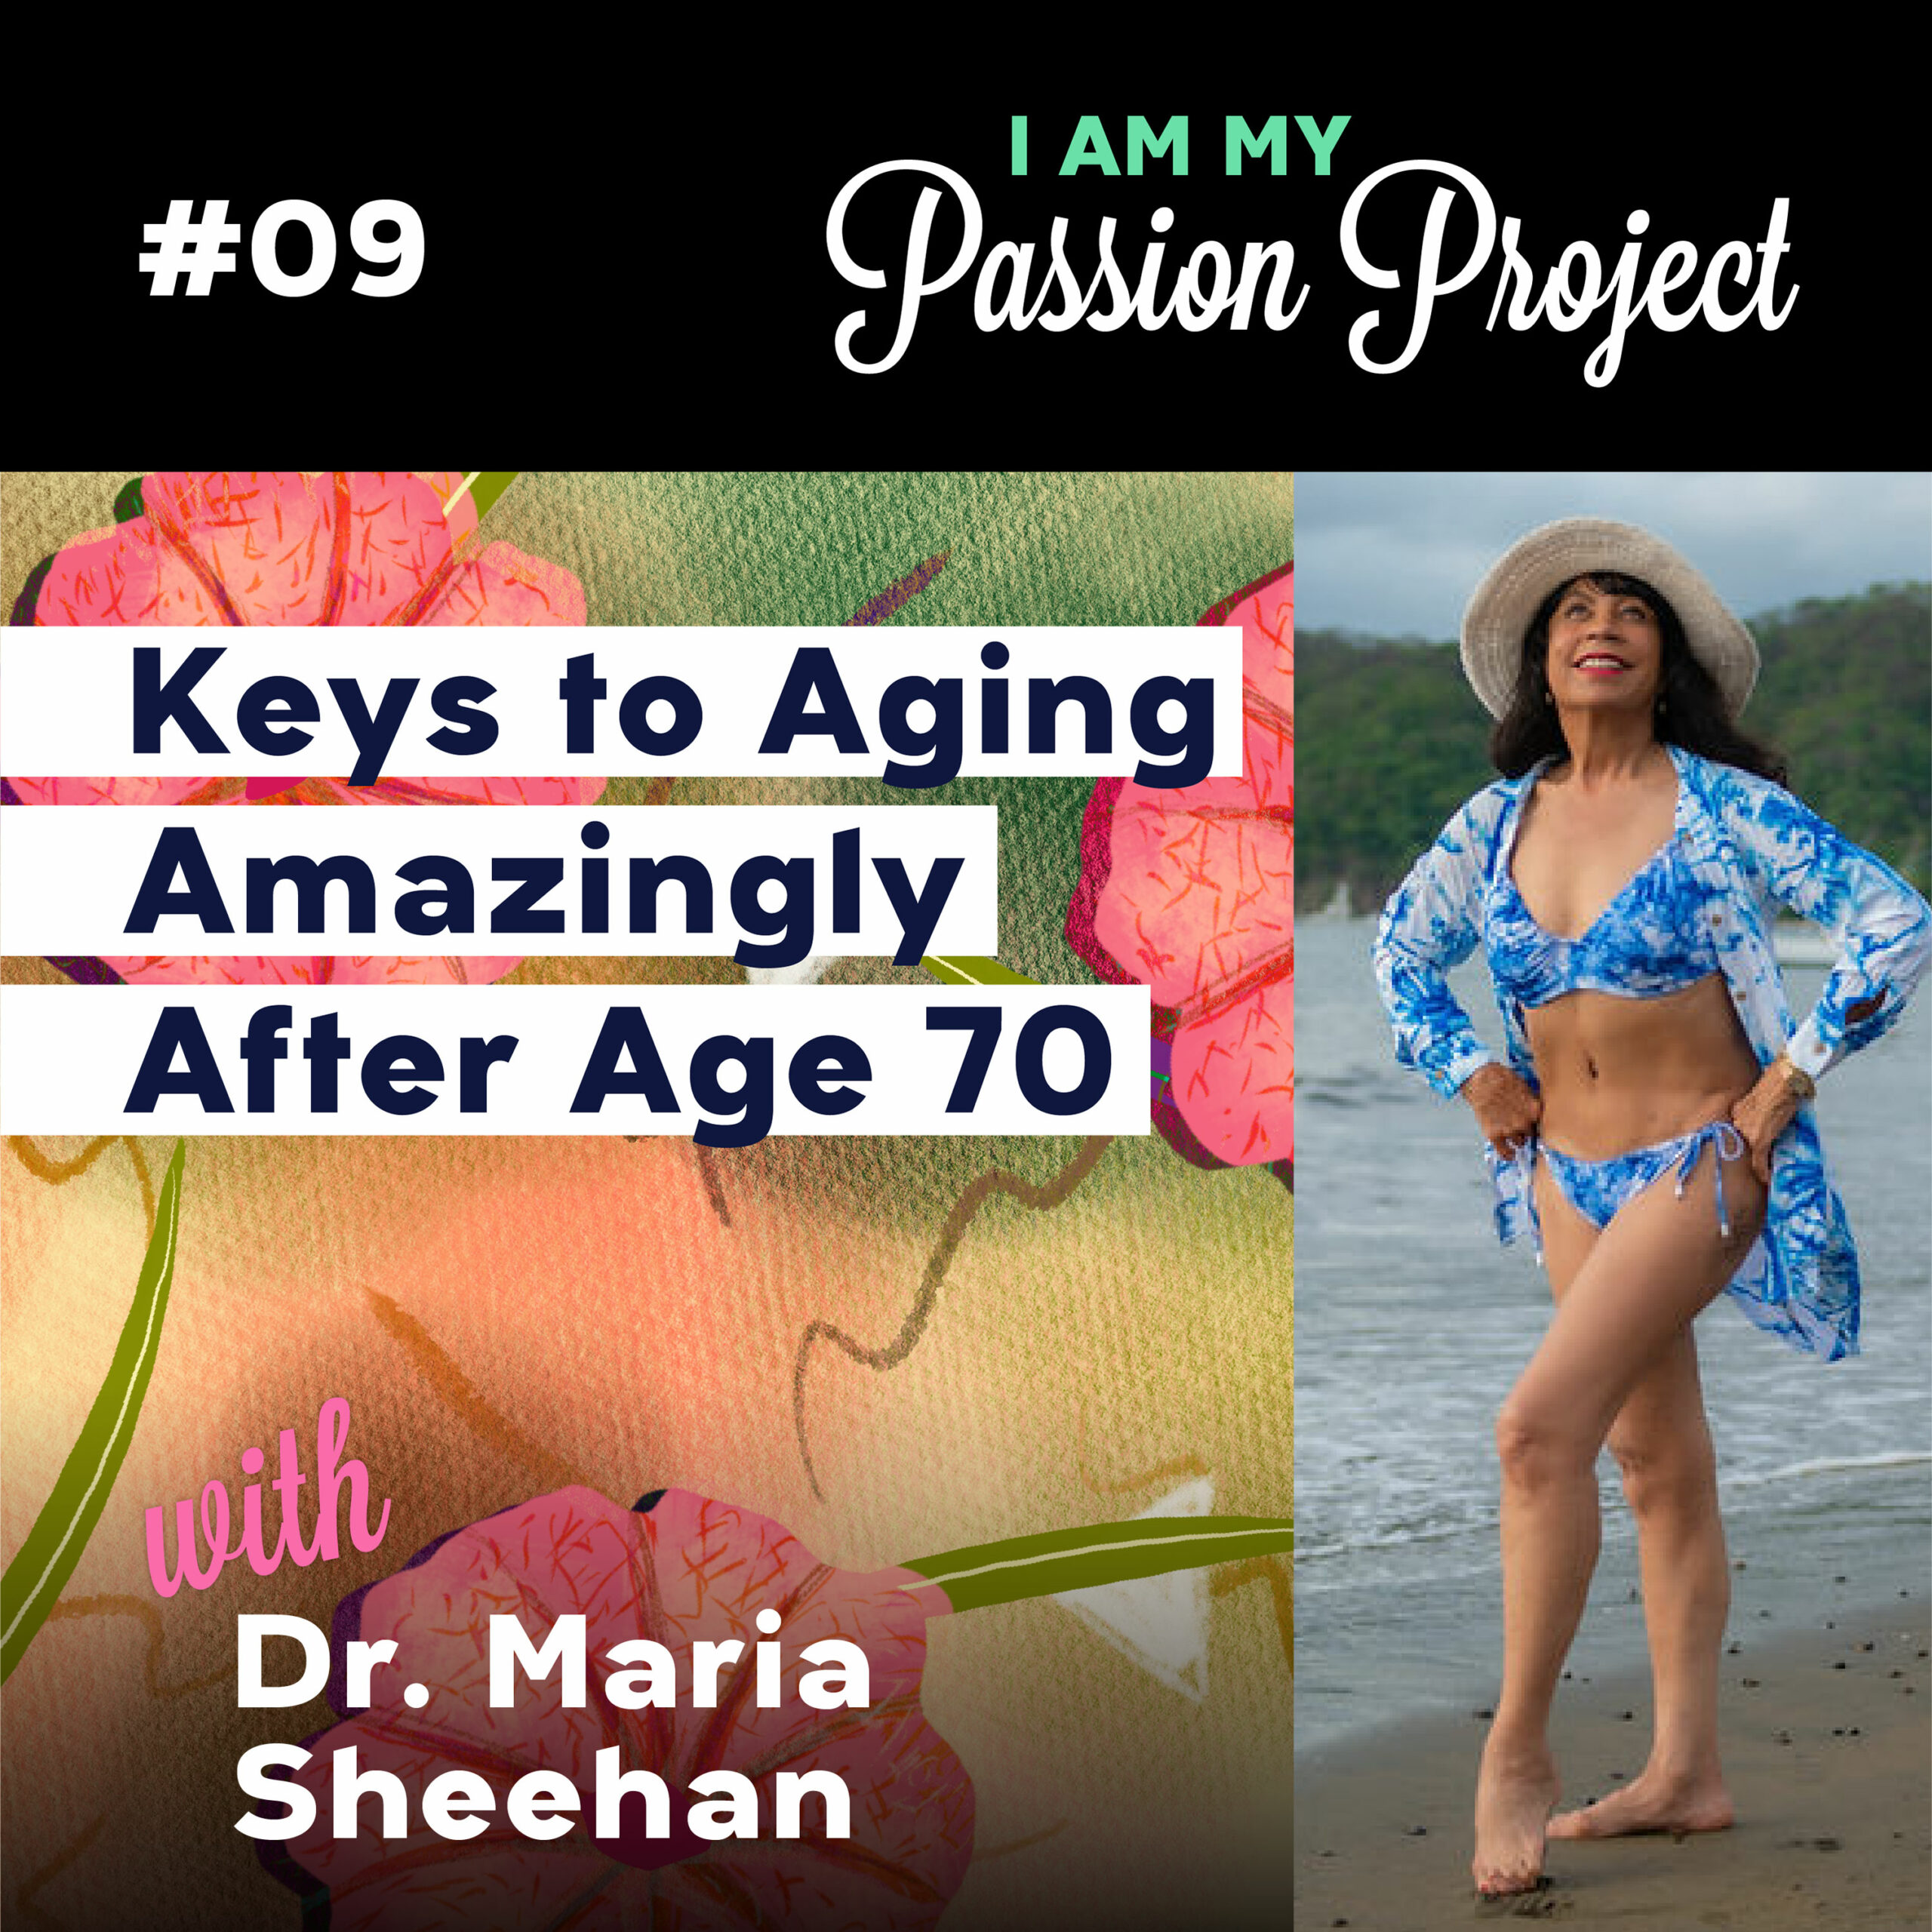 Keys to Aging Amazingly After 70, with Dr. Maria Sheehan